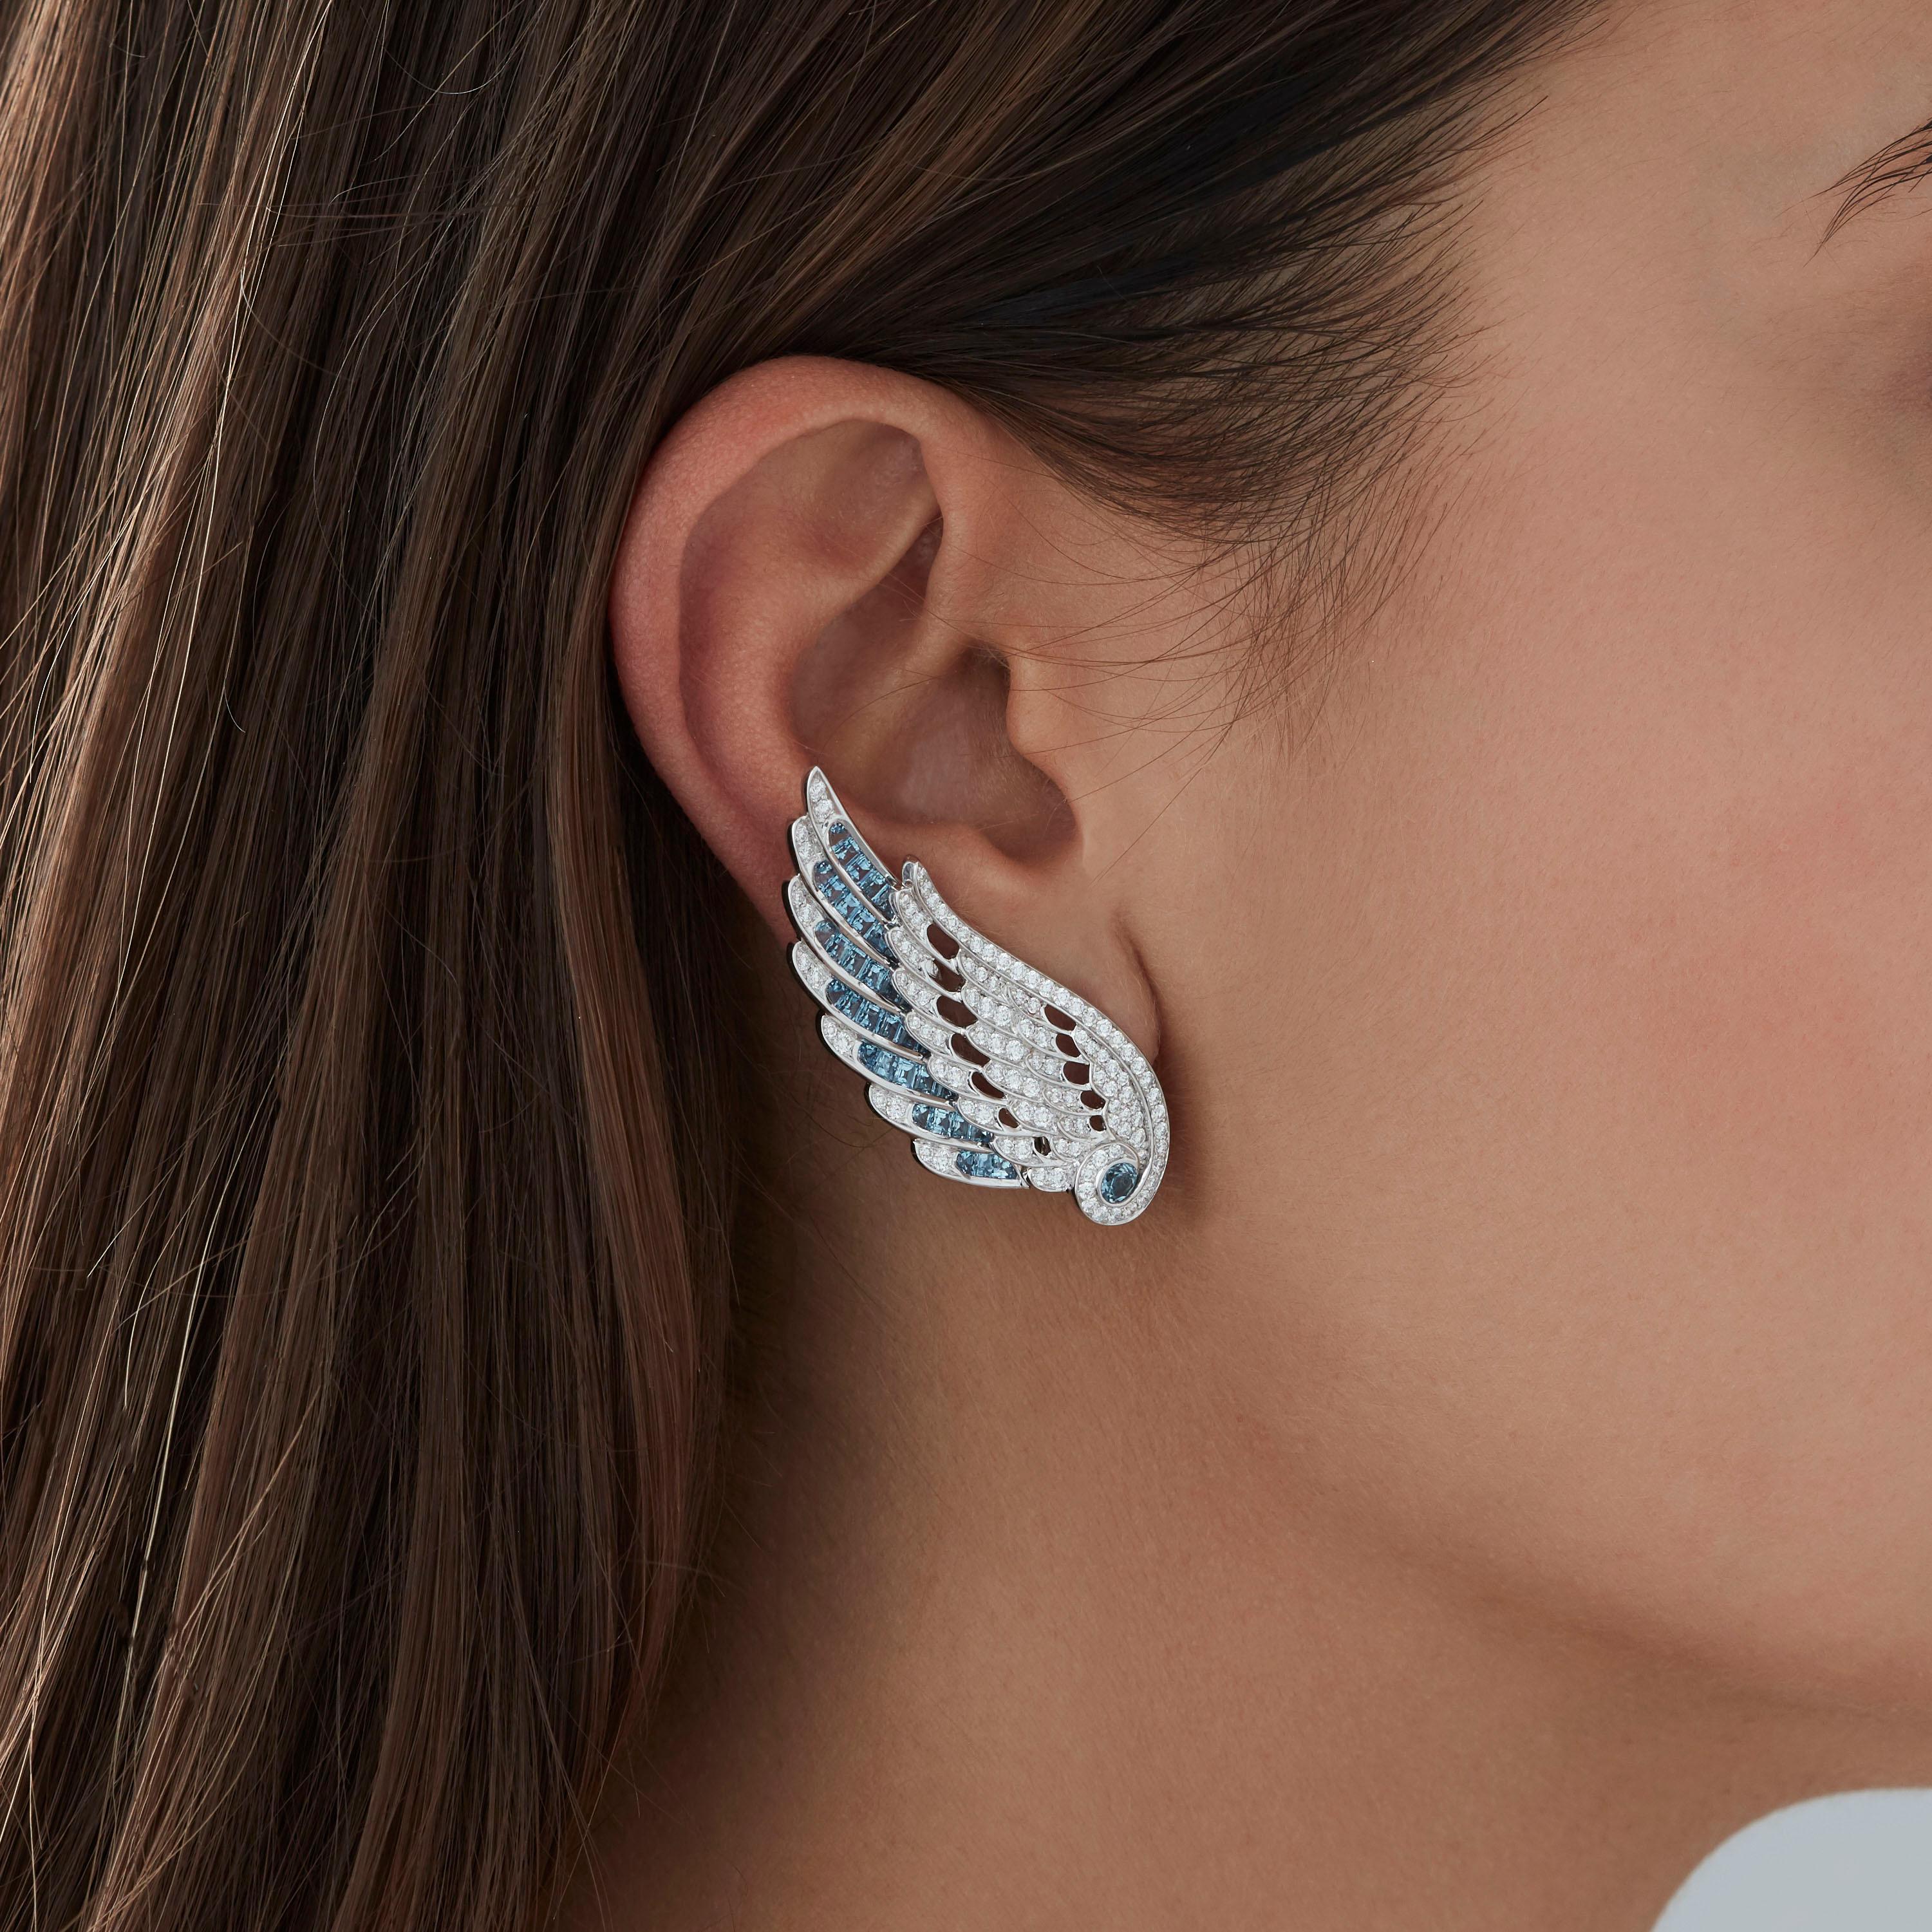 A House of Garrard pair of 18 karat white gold ear climbers from the 'Wings Embrace' collection, set with round and calibre cut aquamarines and round white diamonds.

222 round white diamonds weighing: 1.76cts
90 calibre cut aquamarines weighing: